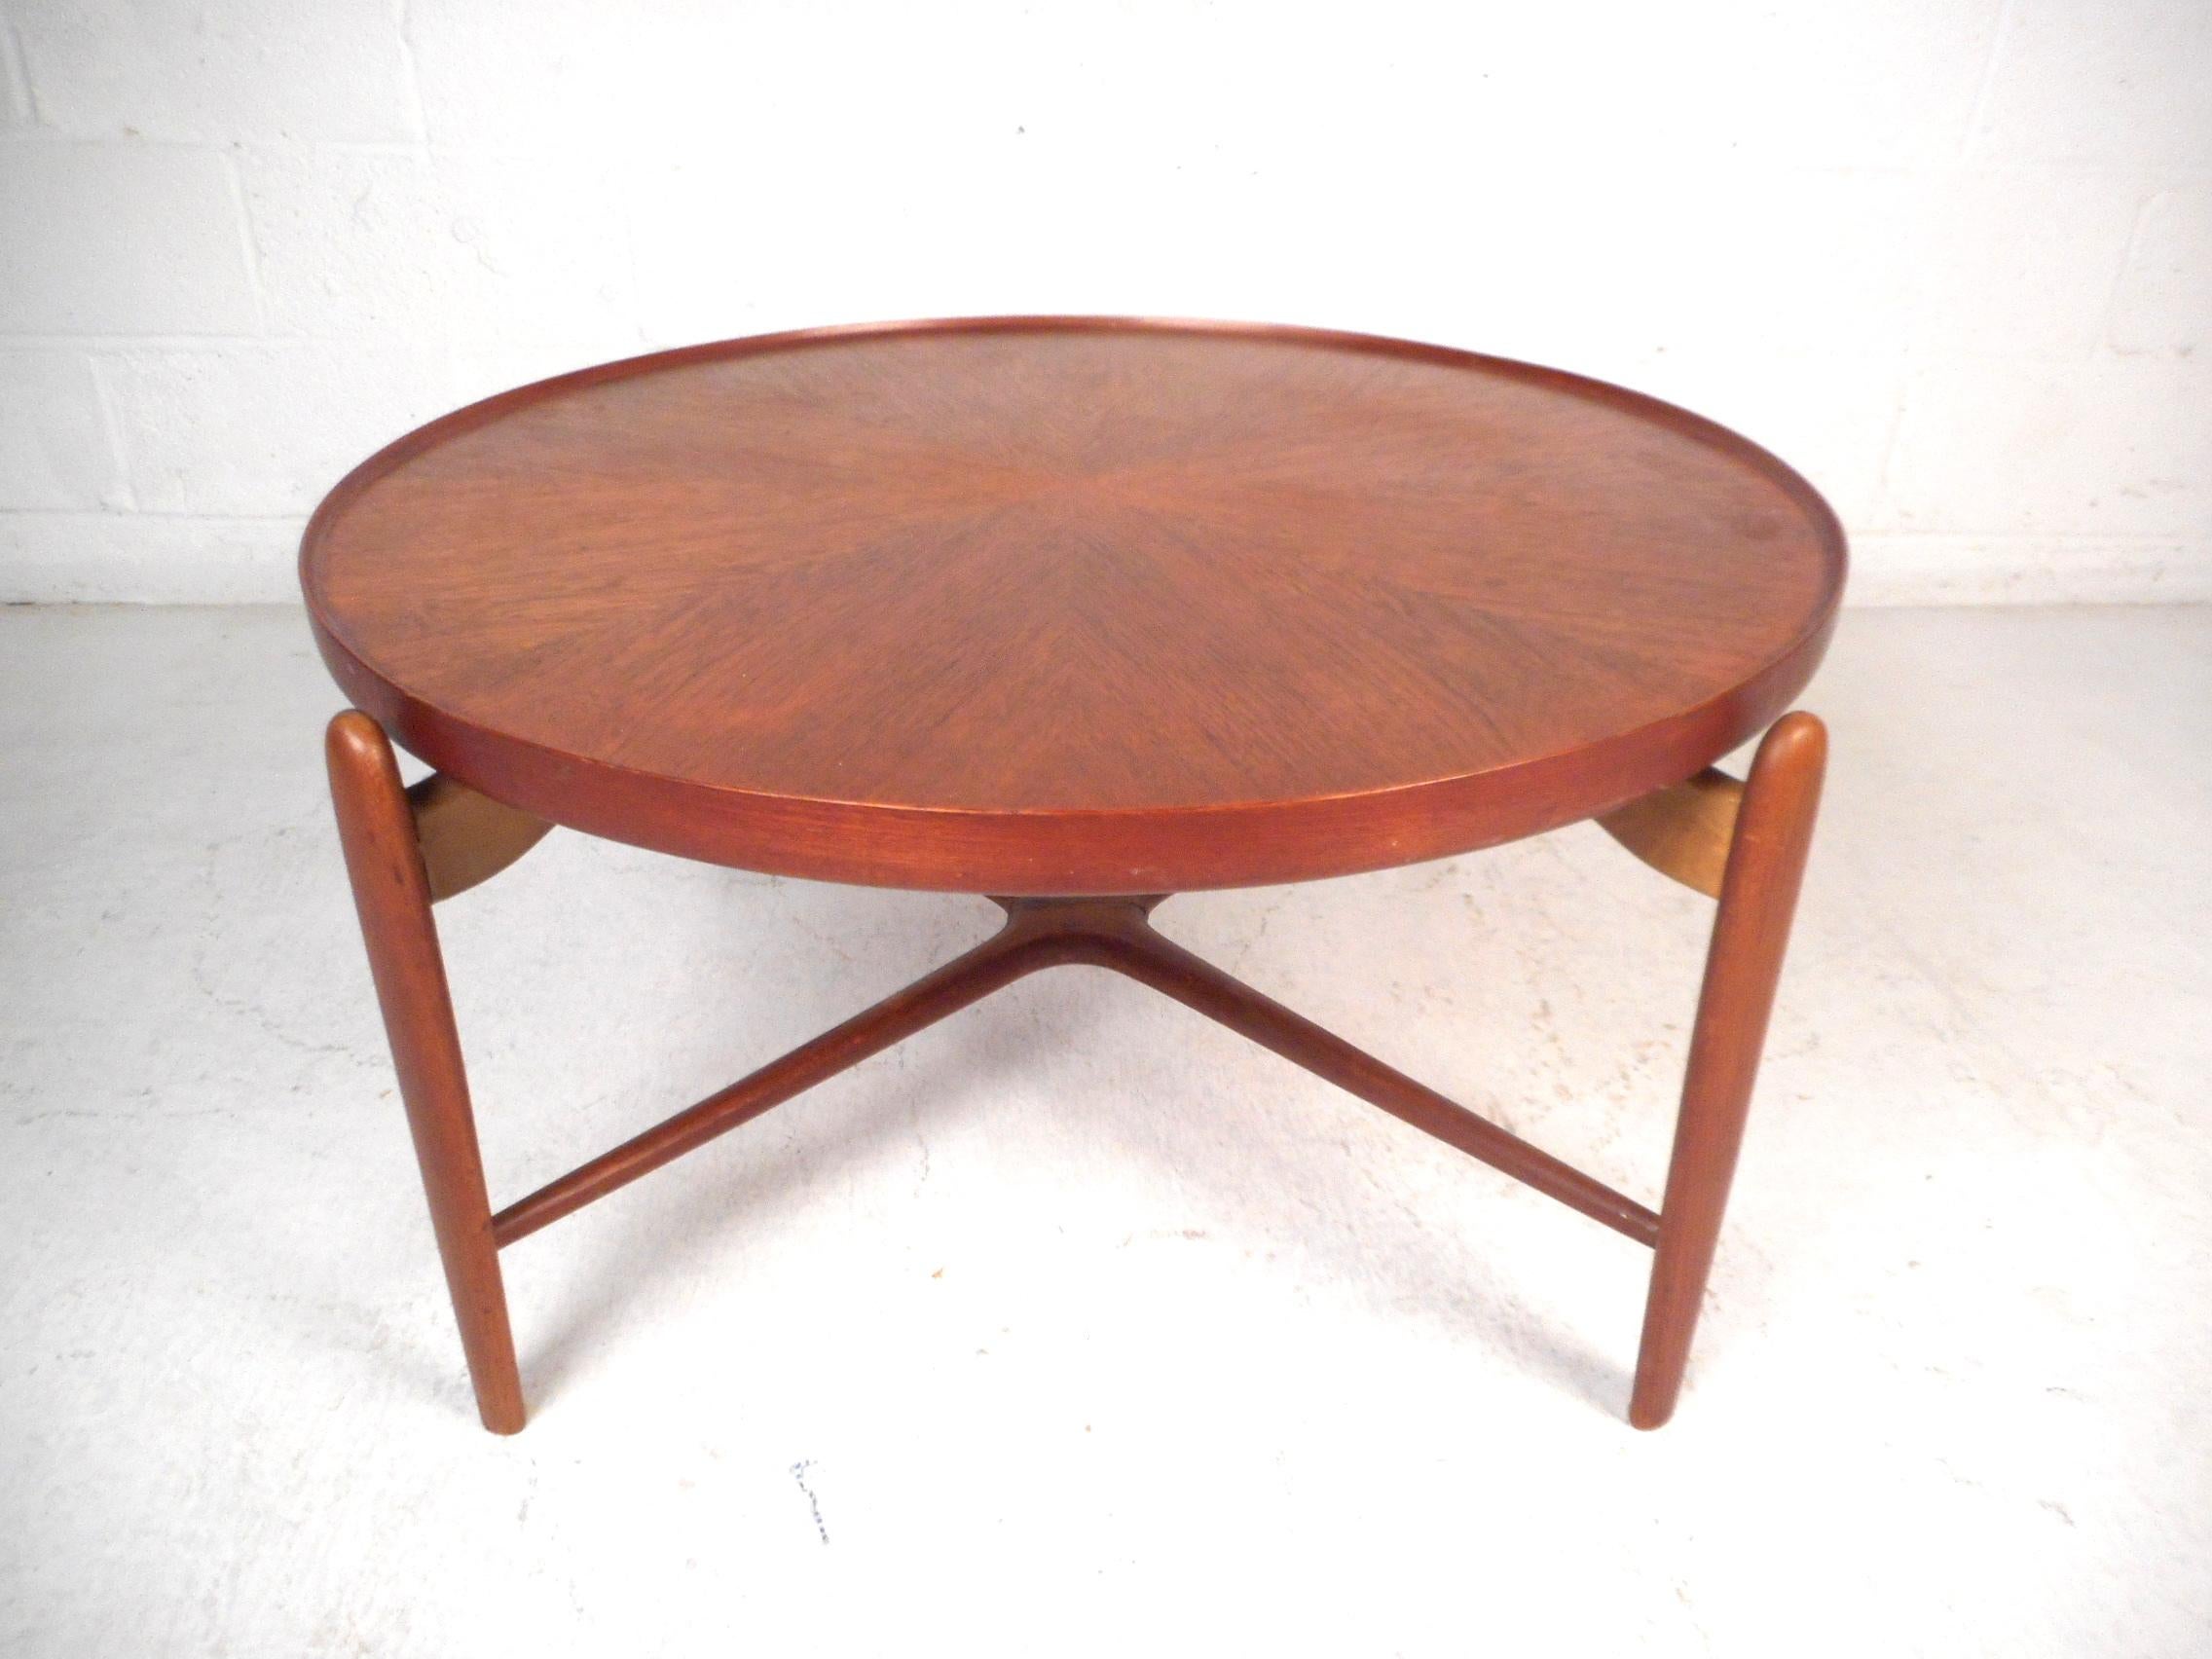 Stunning Danish modern coffee table. Sturdy teak wood construction. Stylish design with raised edges on the tabletop, tapered legs, and sculpted stretchers connecting the four legs of the table. Tabletop shows an interesting four-directional grain